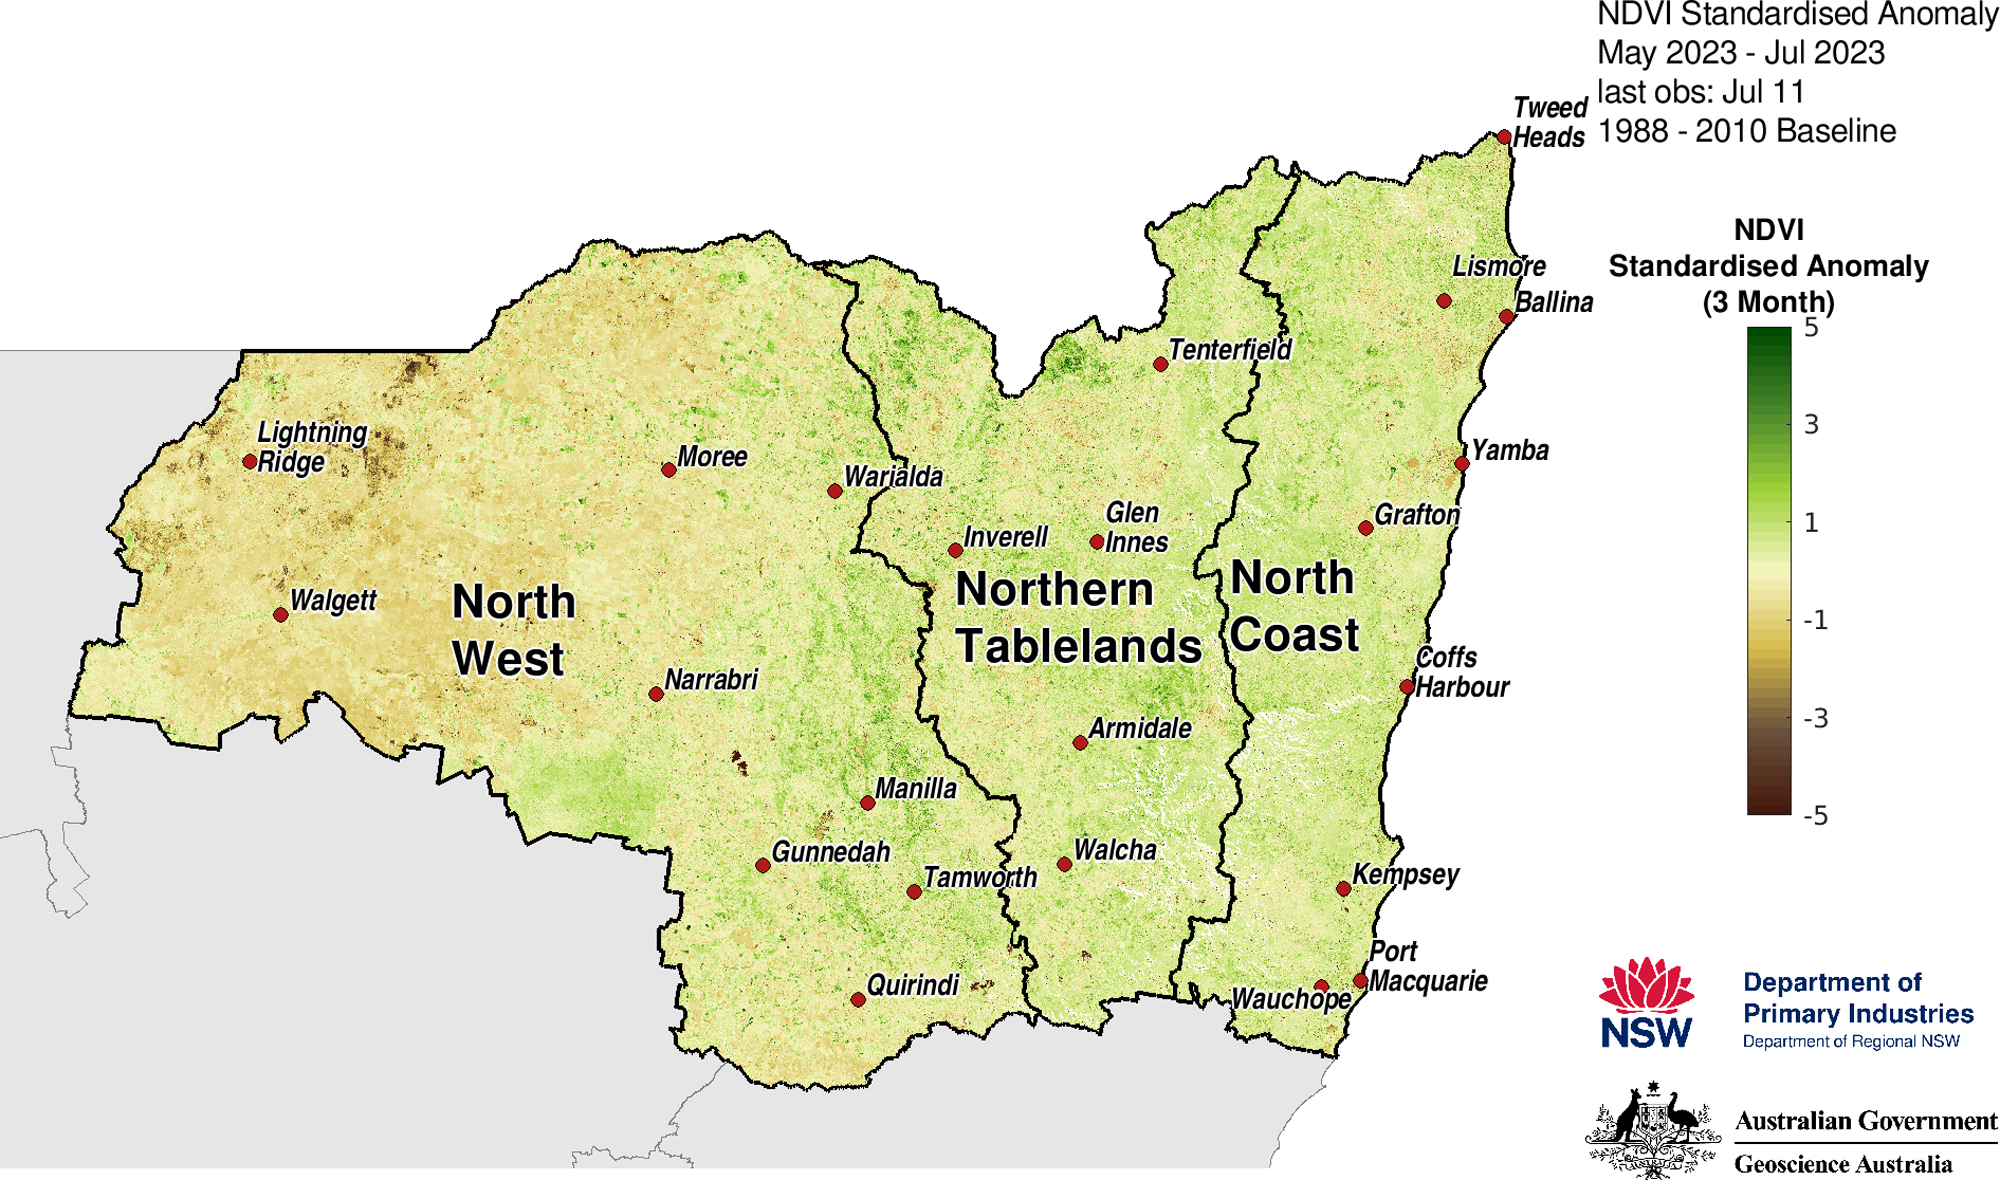 Figure 25. 3-month NDVI anomaly map for the North West, Northern Tableland and North Coast regions